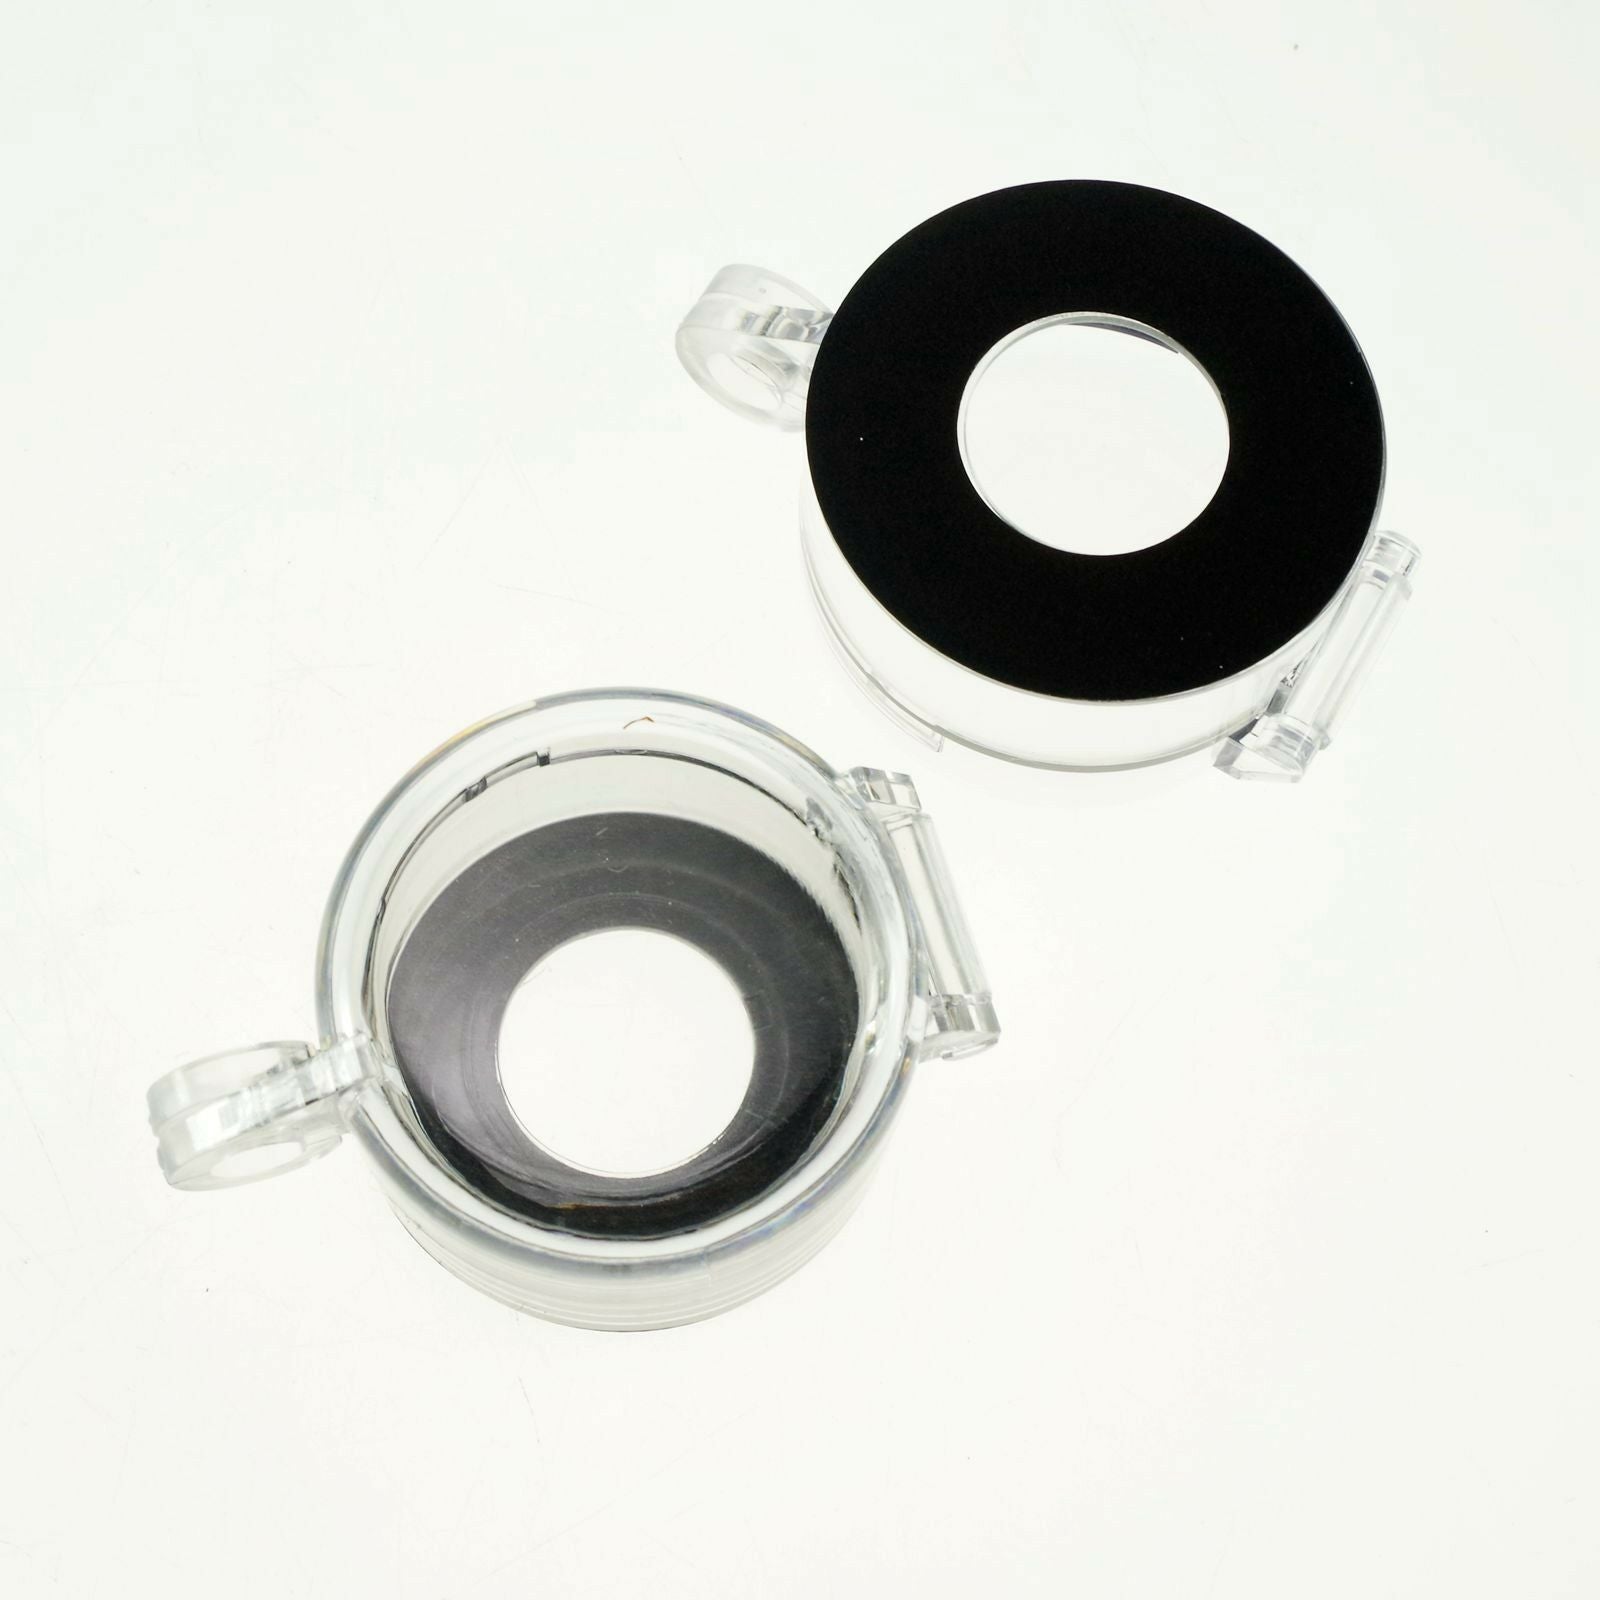 (2)Black Clear 22mm Mounting Emergency Push Button Switch Protective Cover FJ-13